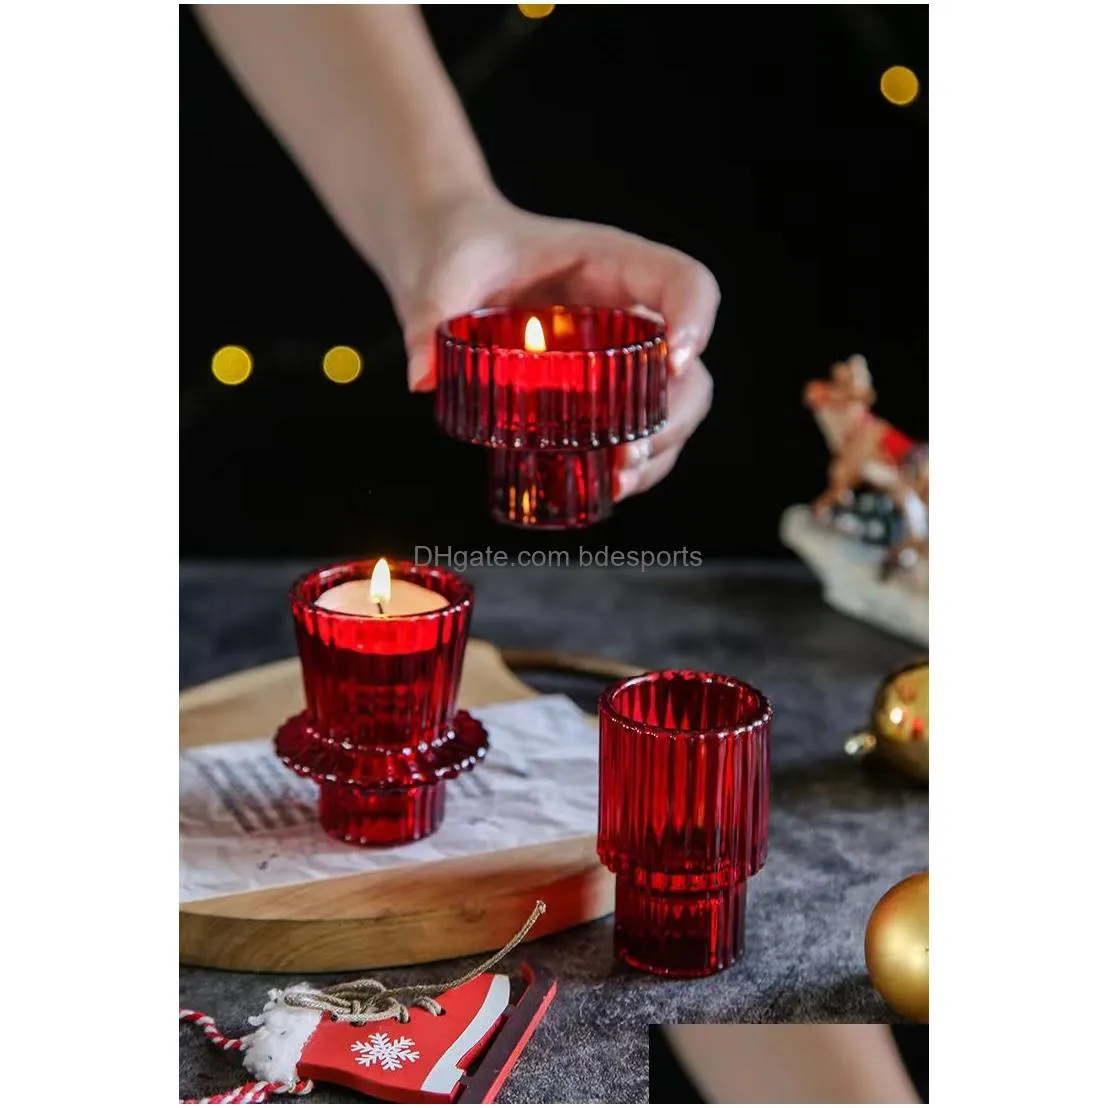 Candle Holders Nordic Pink Glass Candlestick European Taper Candles Holders Table Candle Stand Small Tealight Holder Home Decoration D Dhmov